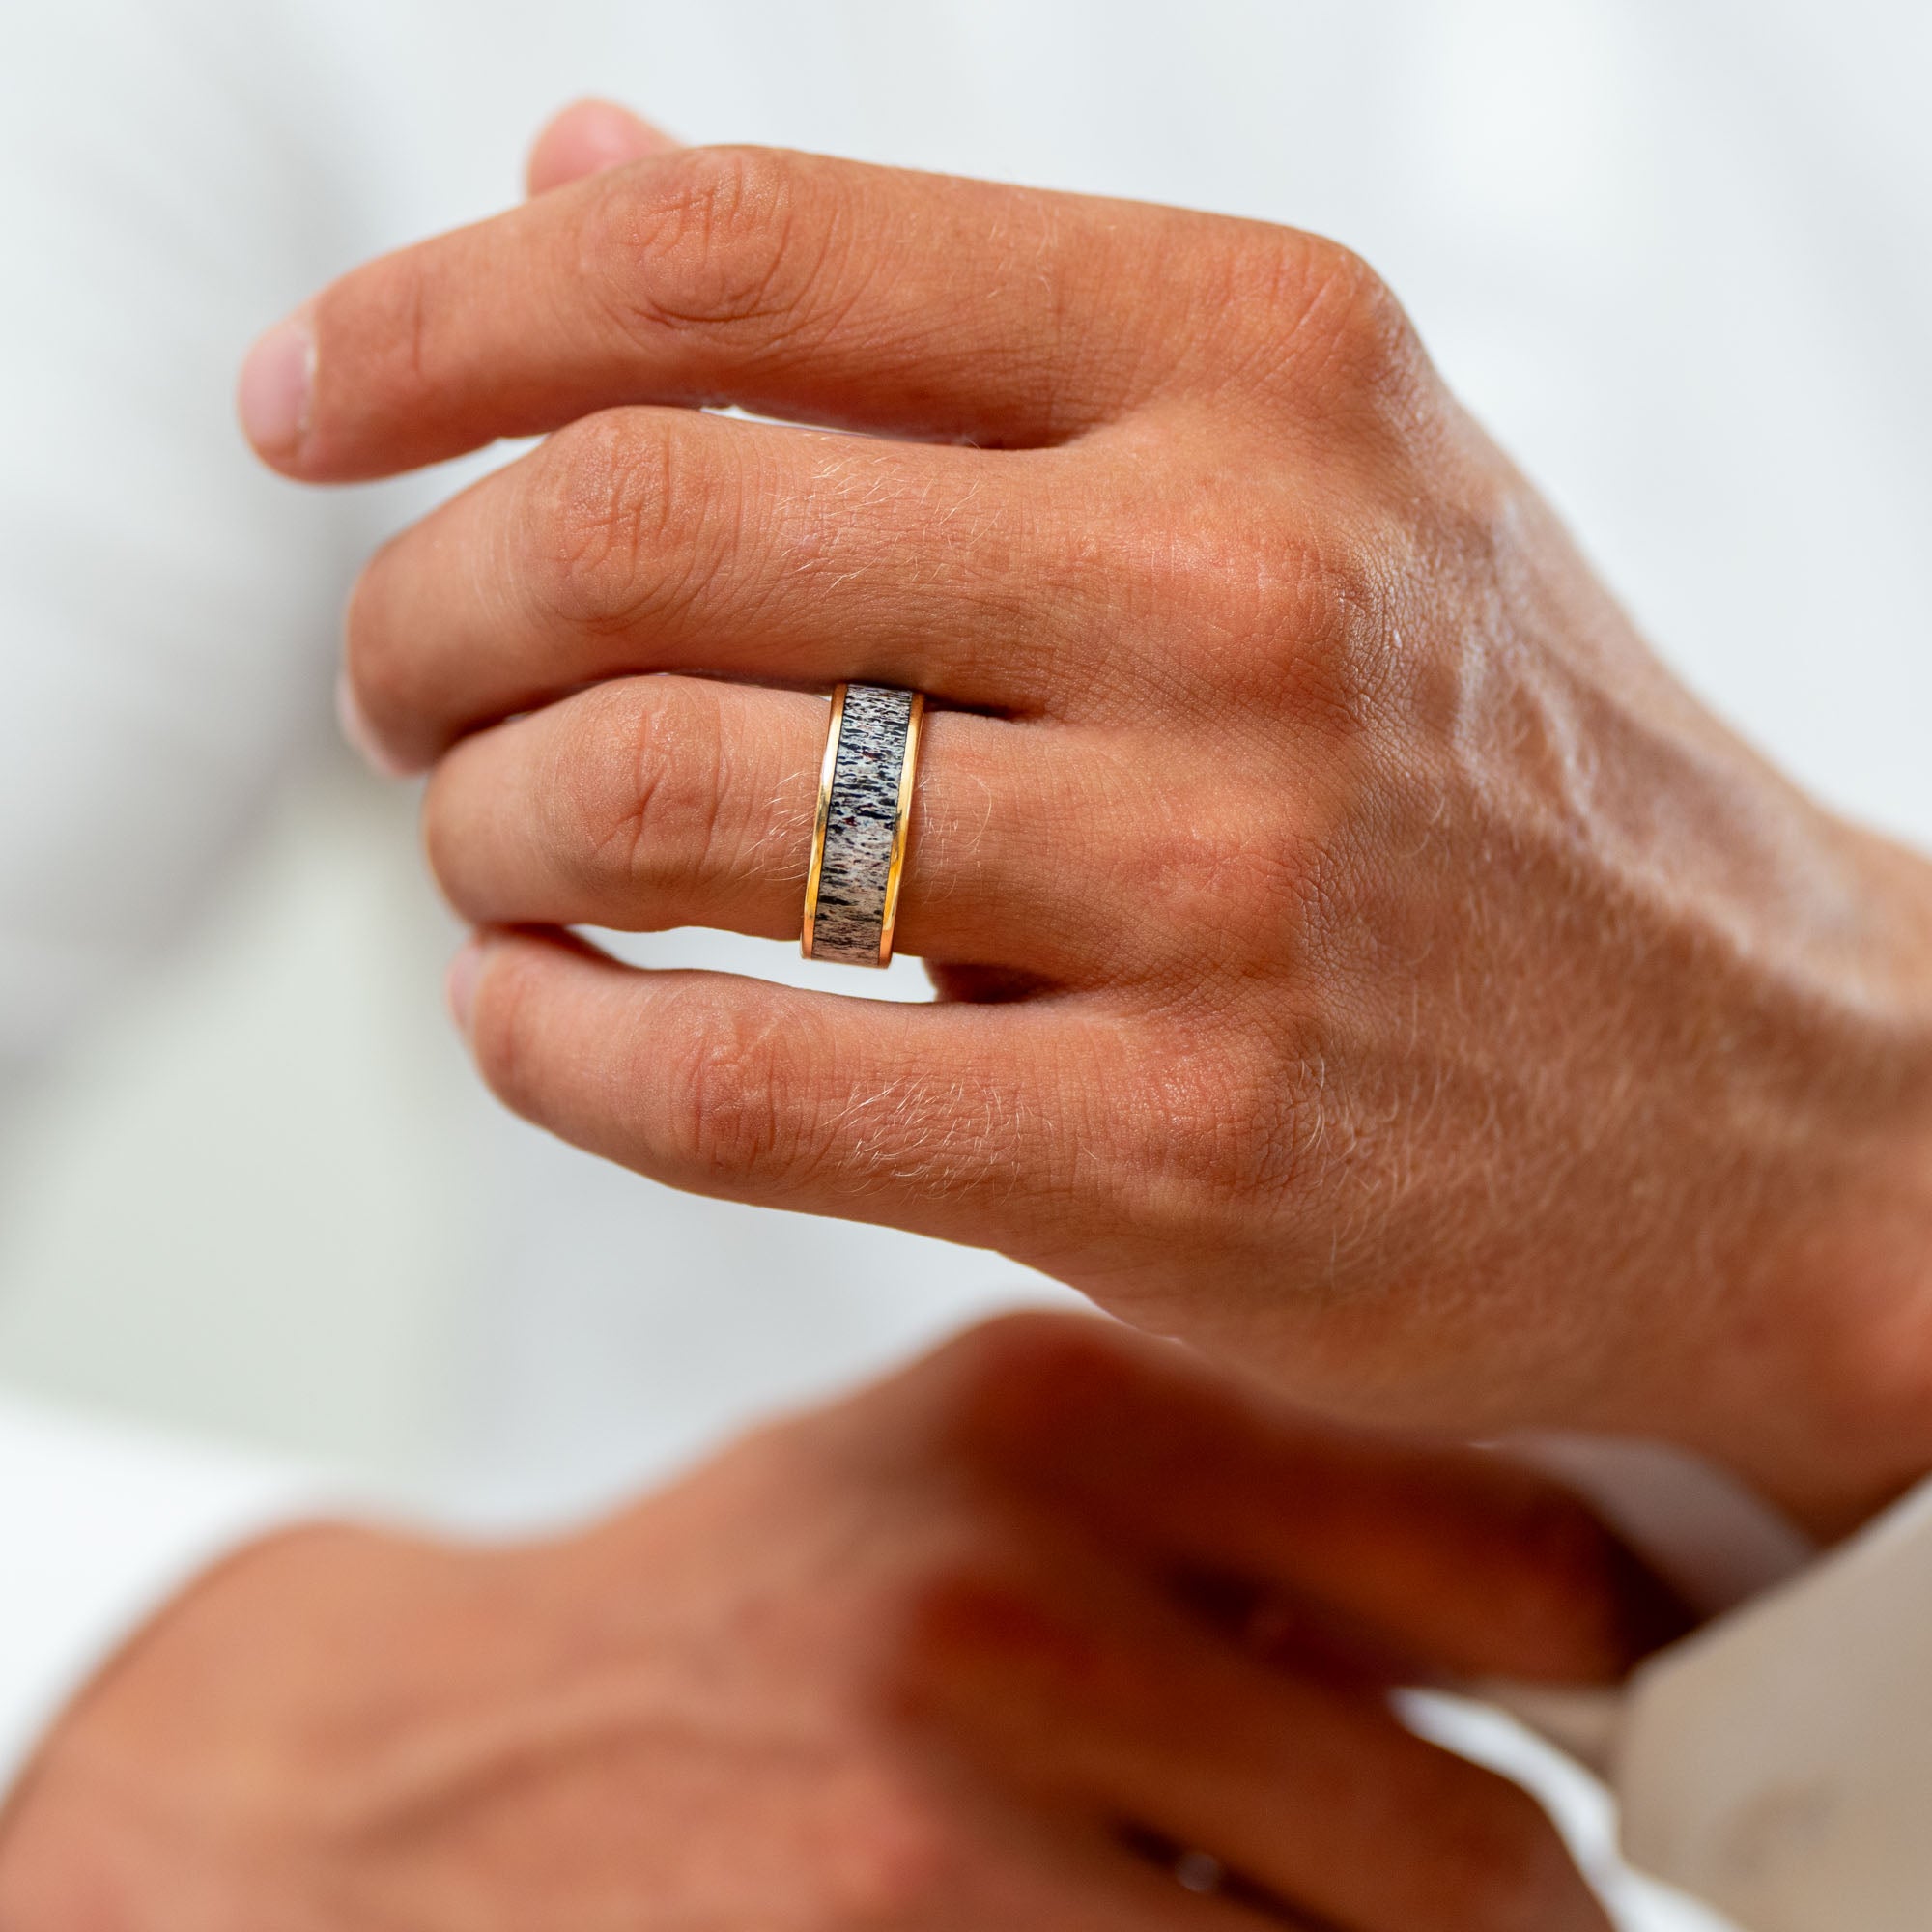 Man Holding Woman Hand with Engagement Ring · Free Stock Photo